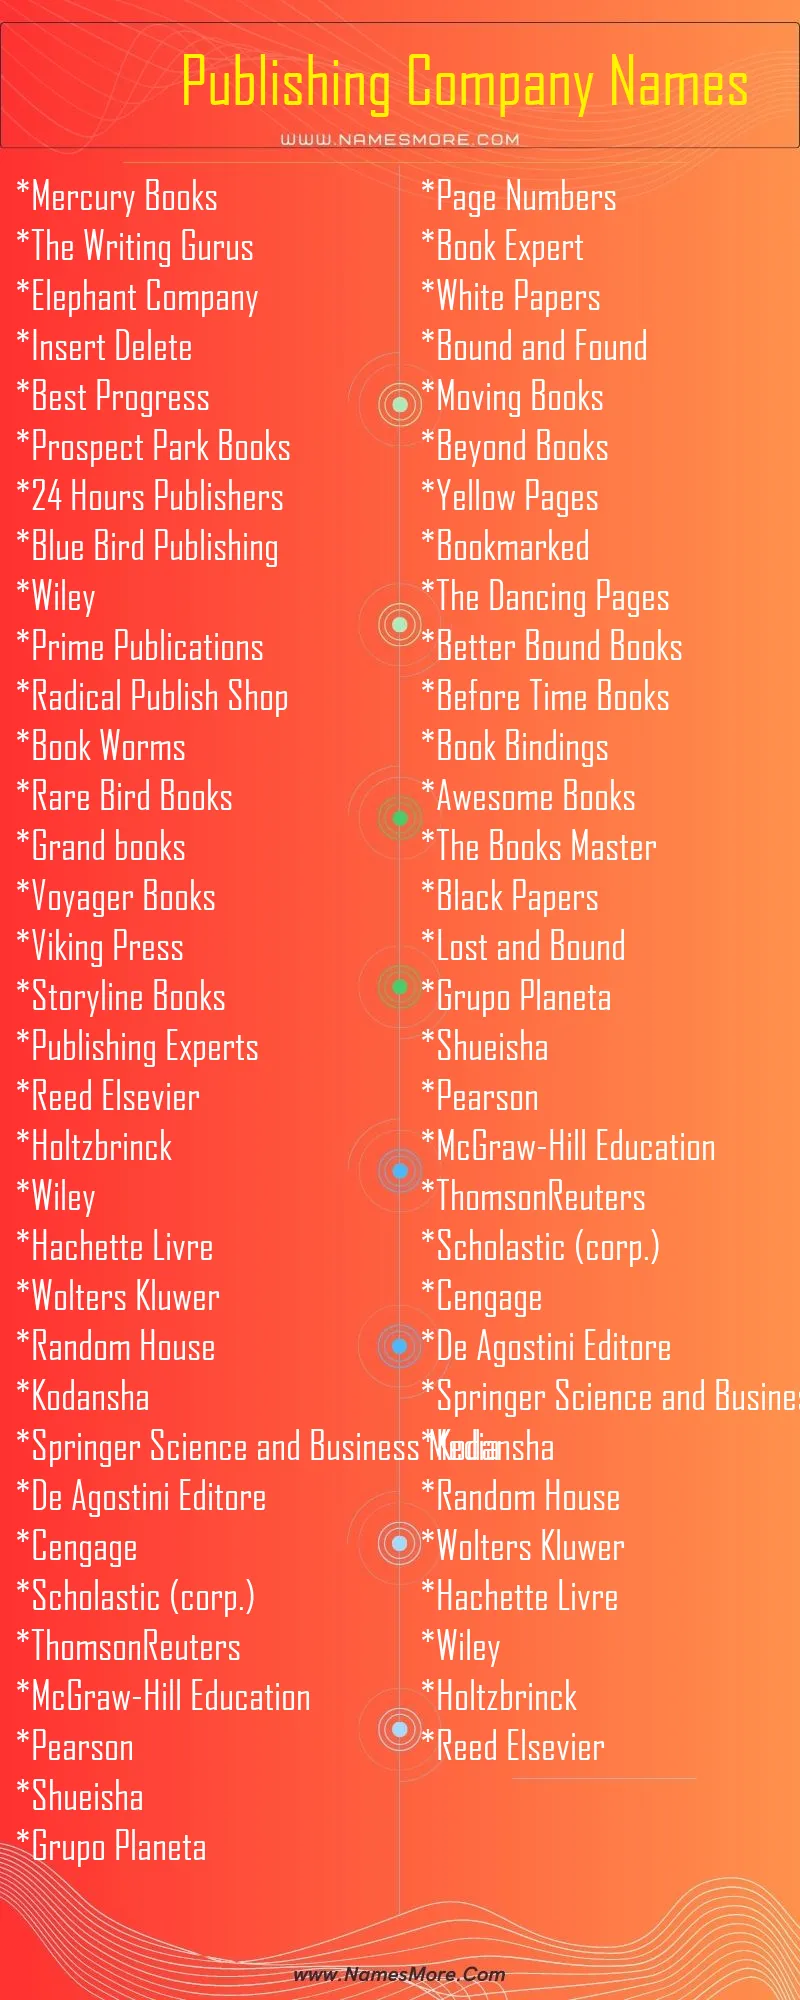 2100+ Publishing Company Names (Creative & Cool) List Infographic